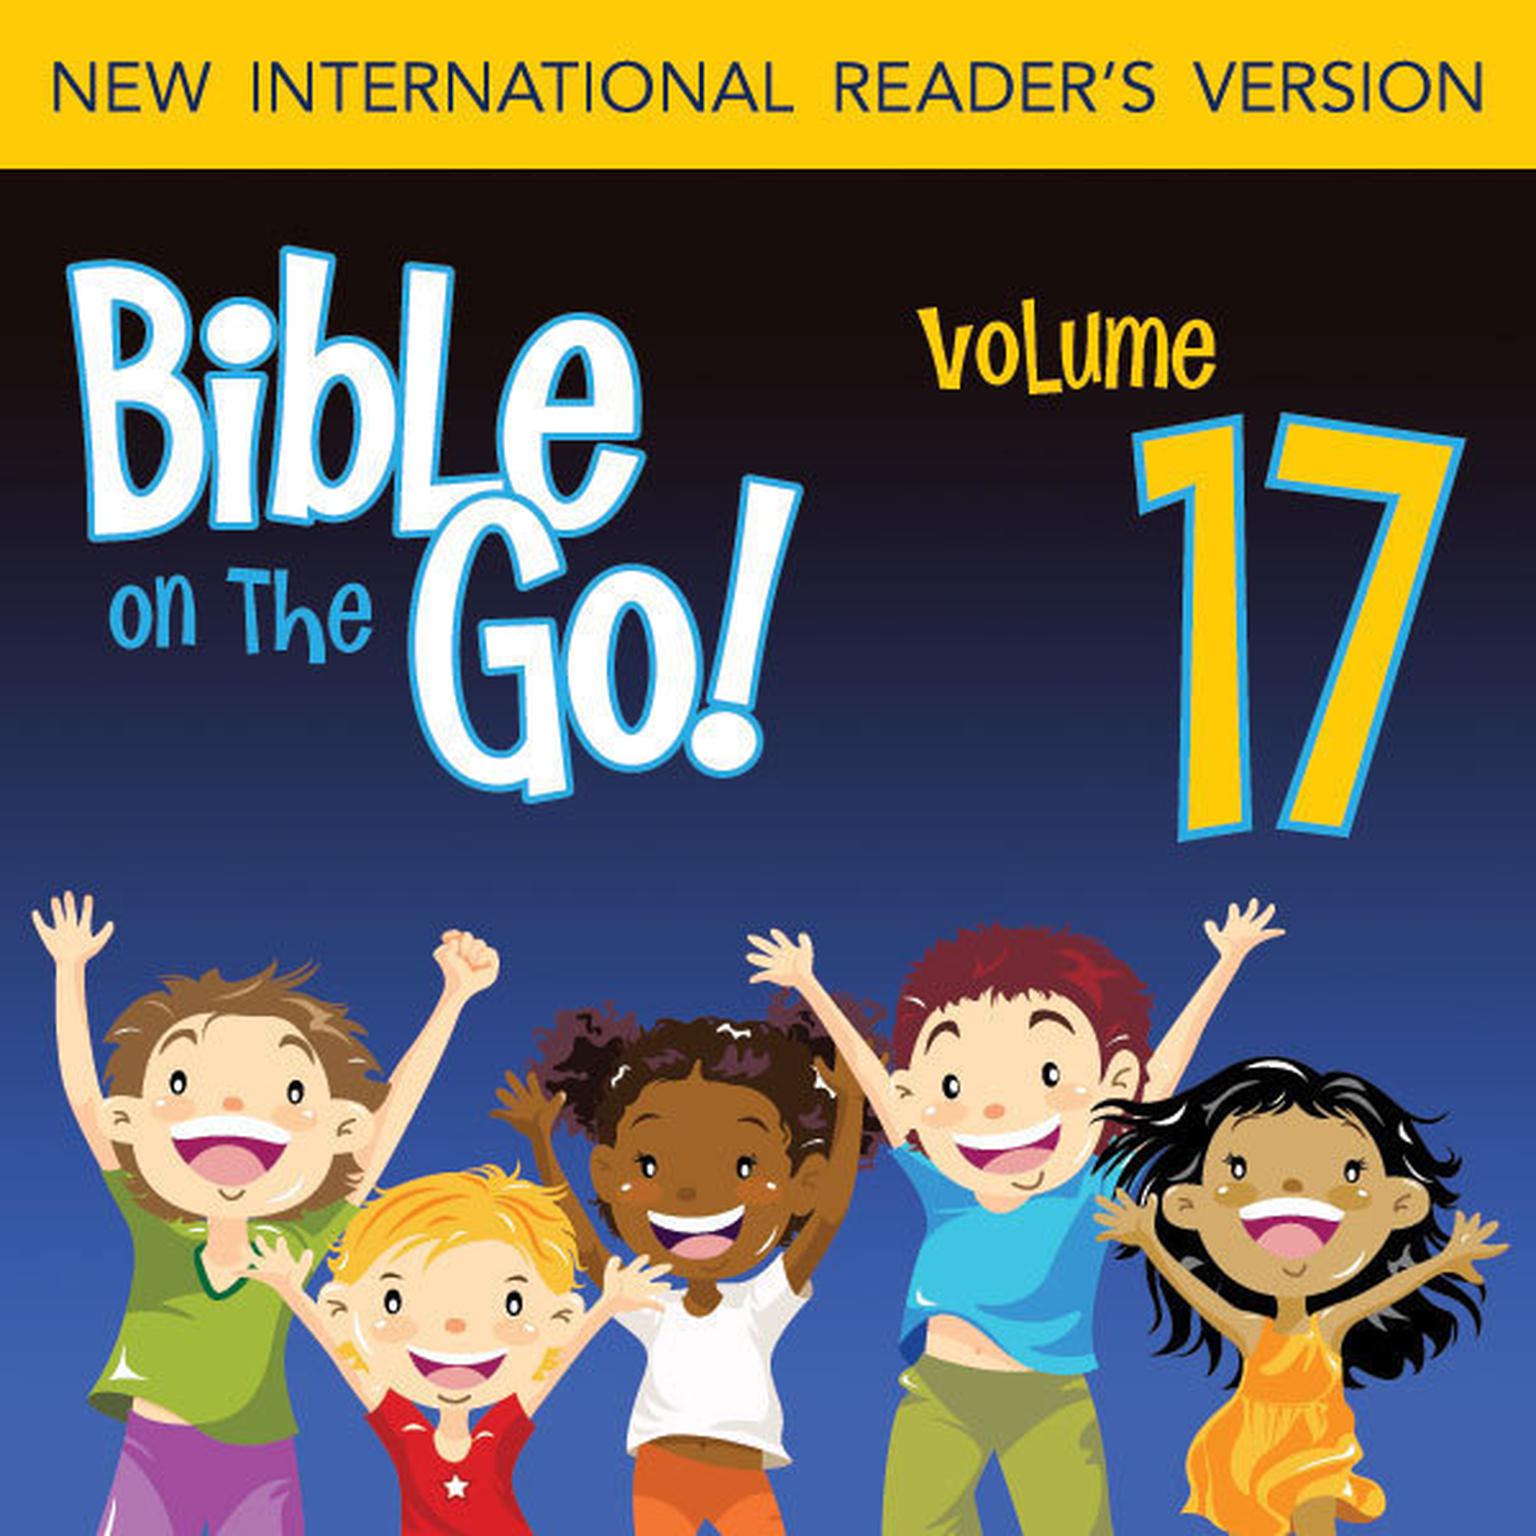 Bible on the Go Audio Bible - New International Readers Version, NIrV: Vol. 17 David Anointed King; David and Bathsheba; David Plans to Build the Temple (2 Samuel 2, 5, 9, 11; 1 Chronicles 22) Audiobook, by Zondervan